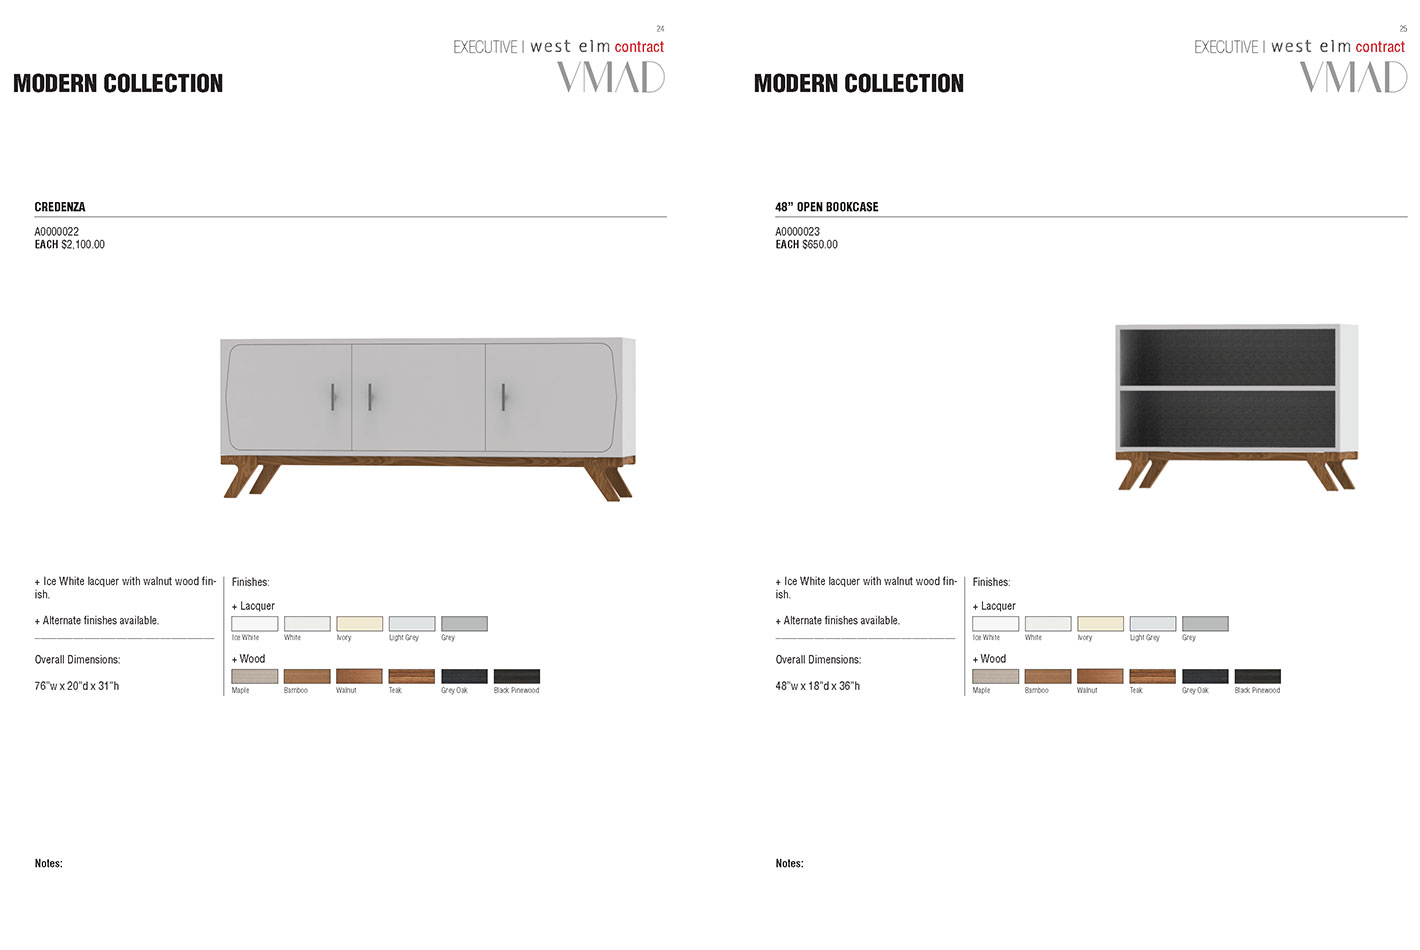 Selection from VMAD concept book